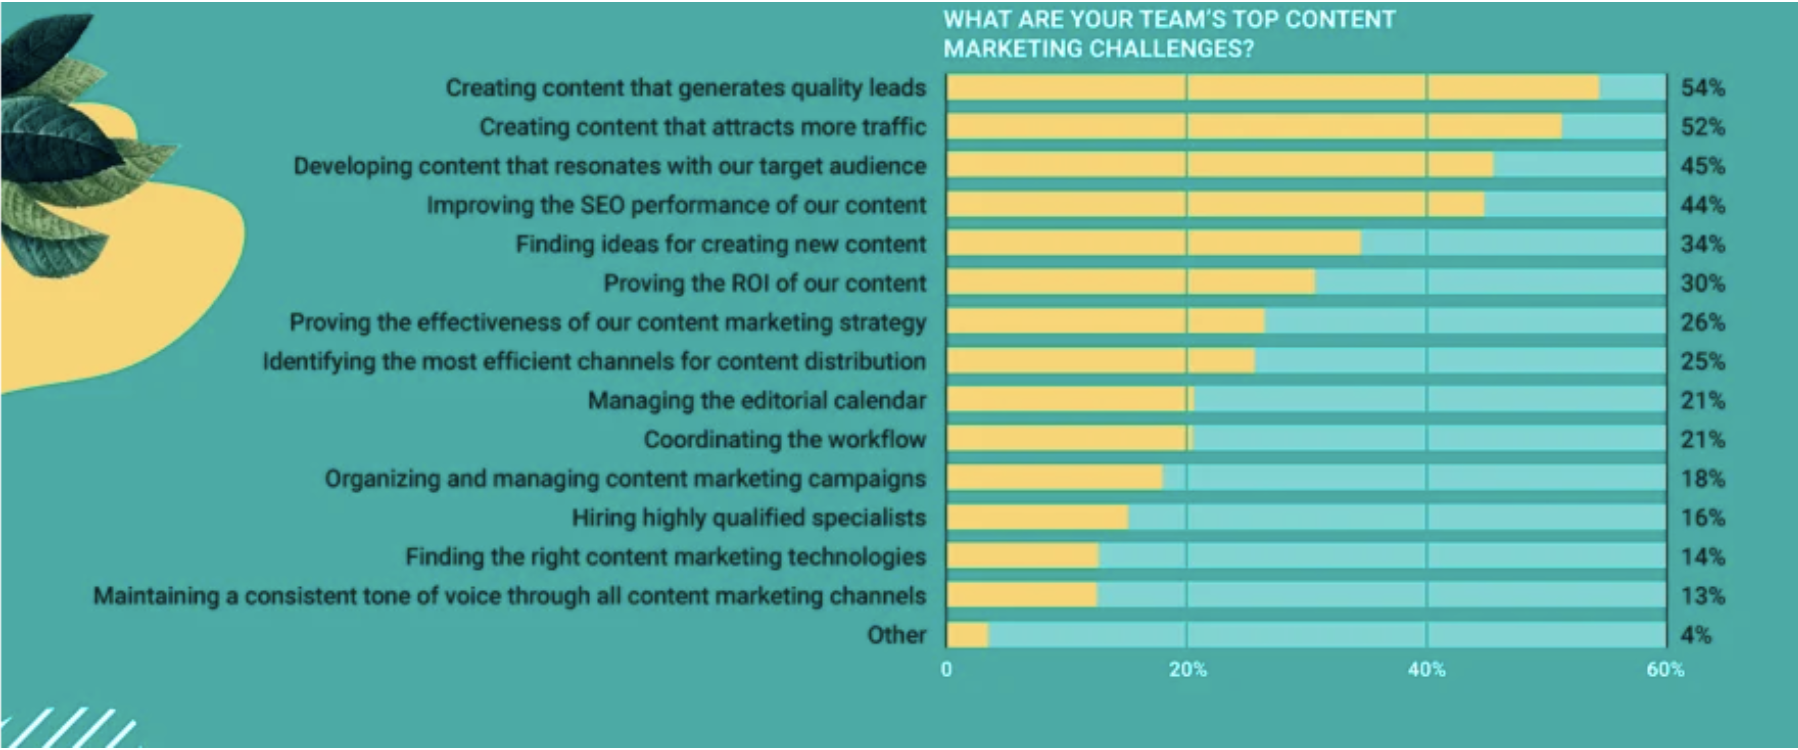 Bar graph showing the biggest content marketing challenges